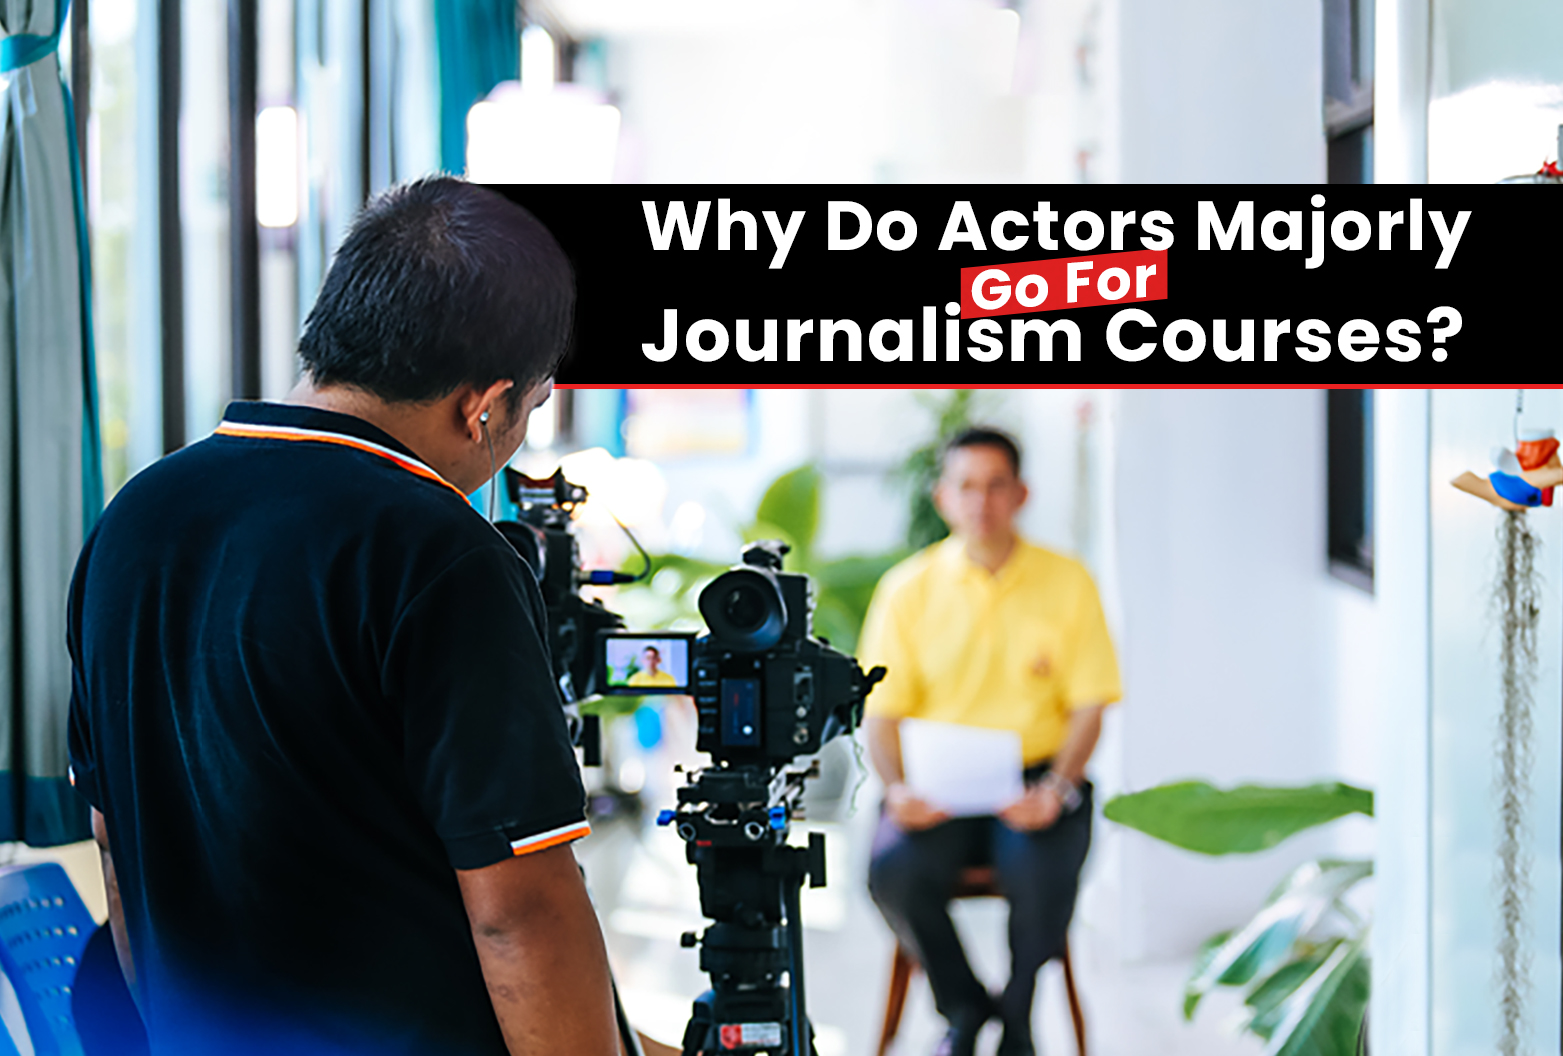 Why Do Actors Majorly Go For Journalism Courses?